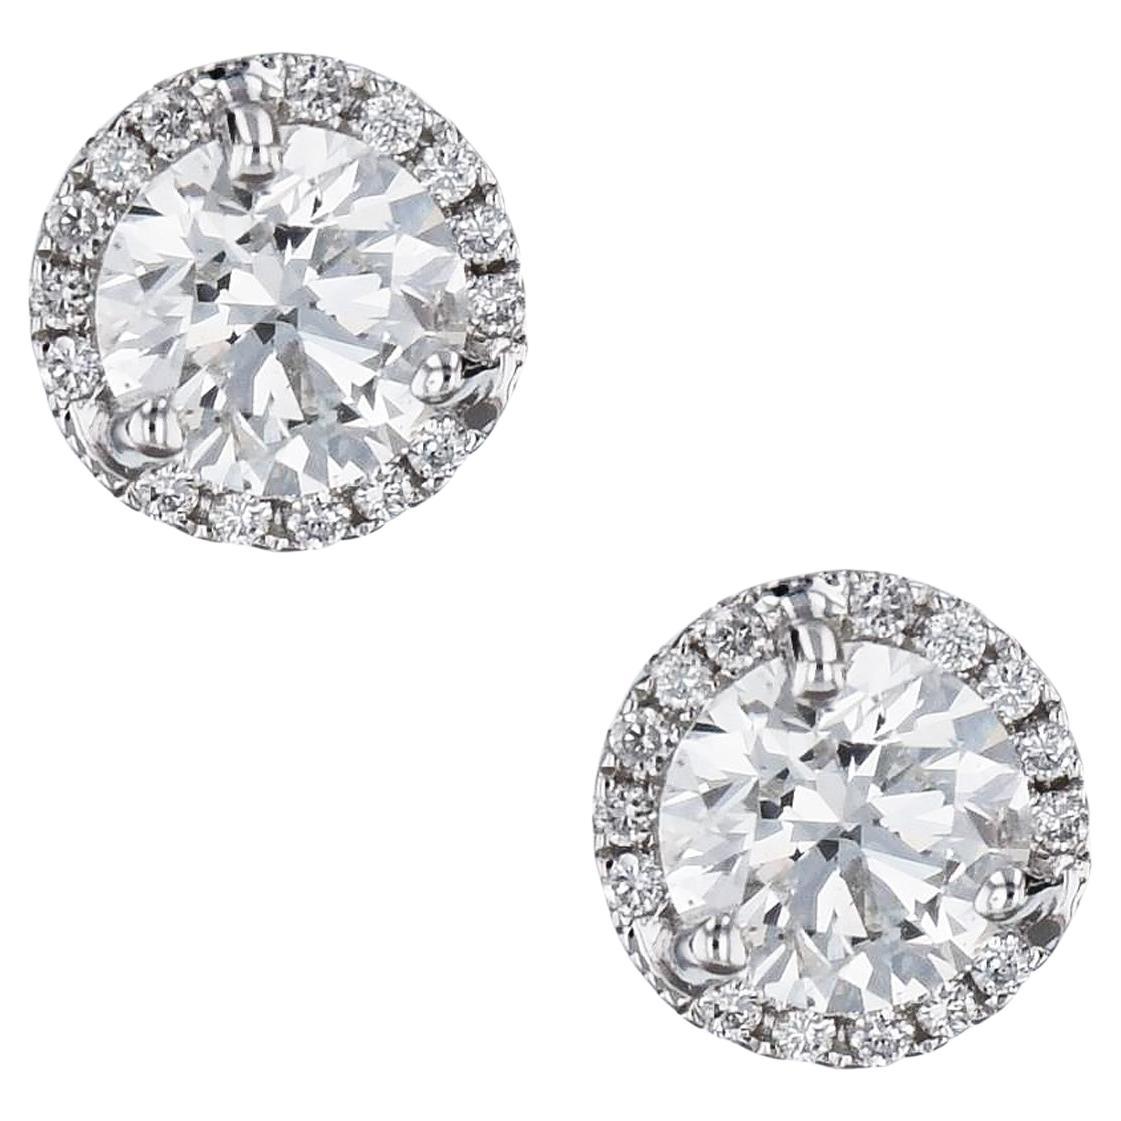 Round Diamond and Pave Stud Earrings